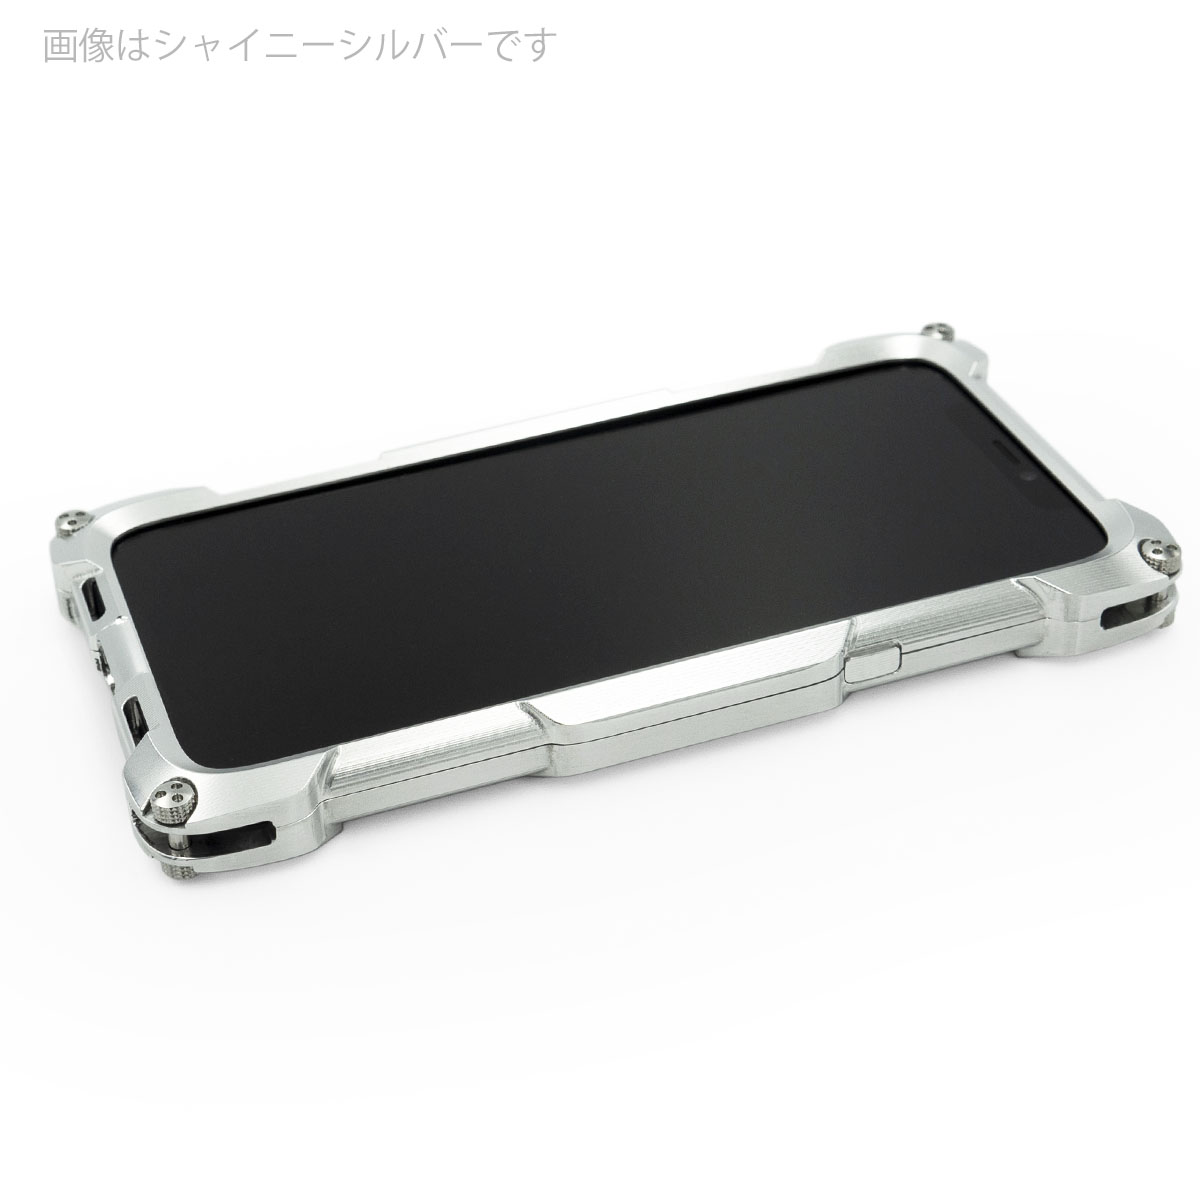 Quattro for iPhone12Pro Max HD - Full metal models - Factron 